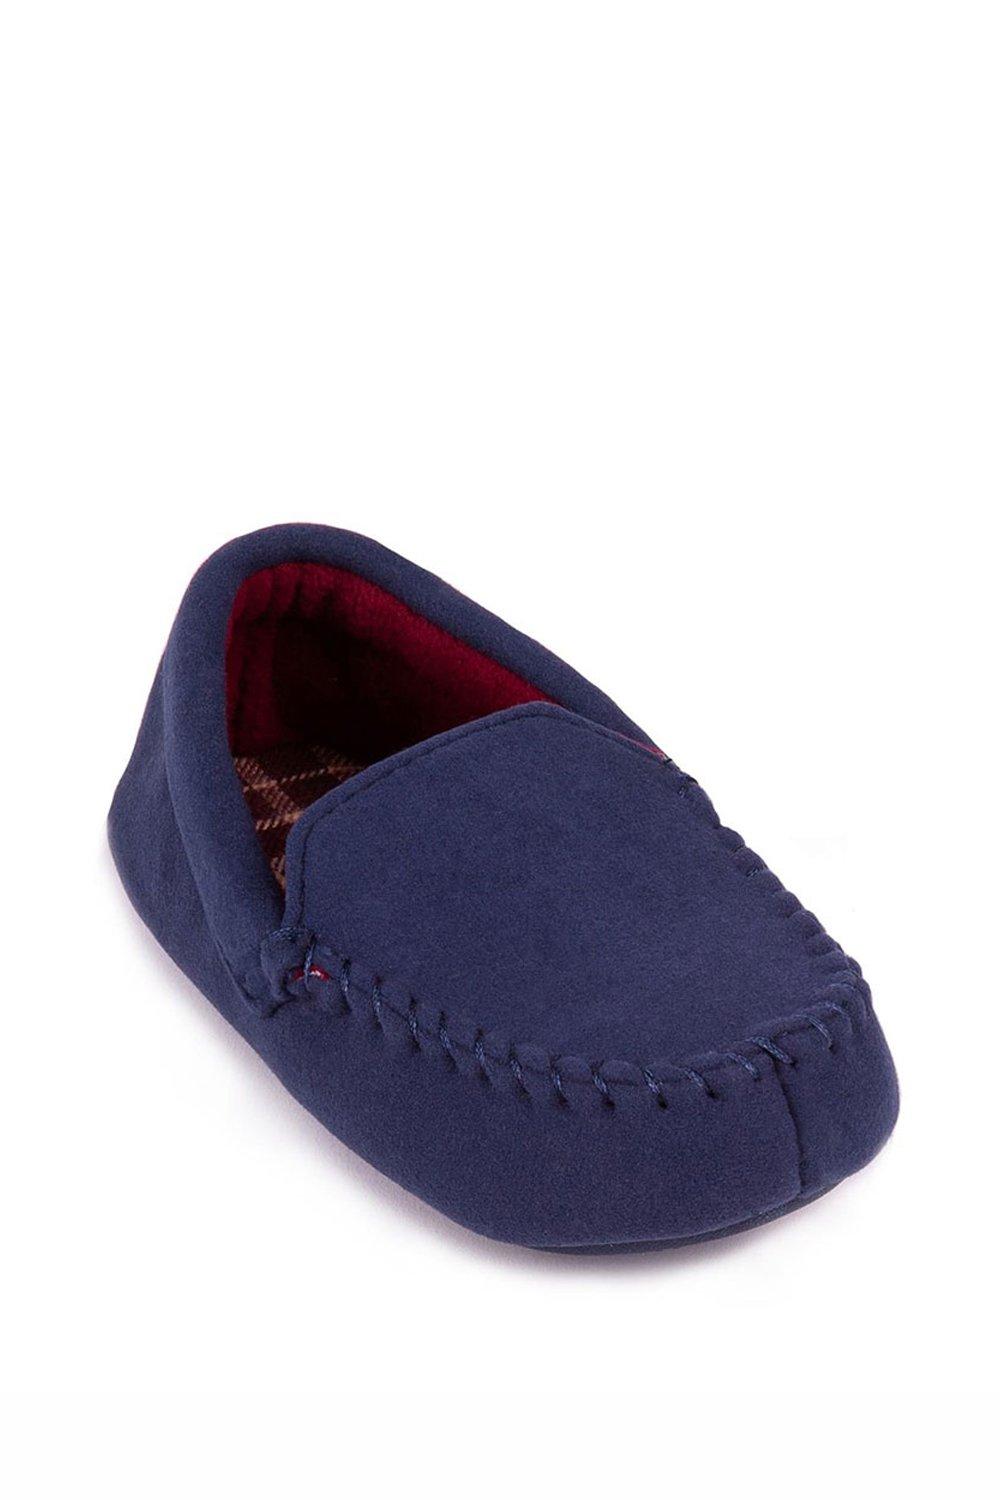 Moccasin Slipper with Contrast Check Lining